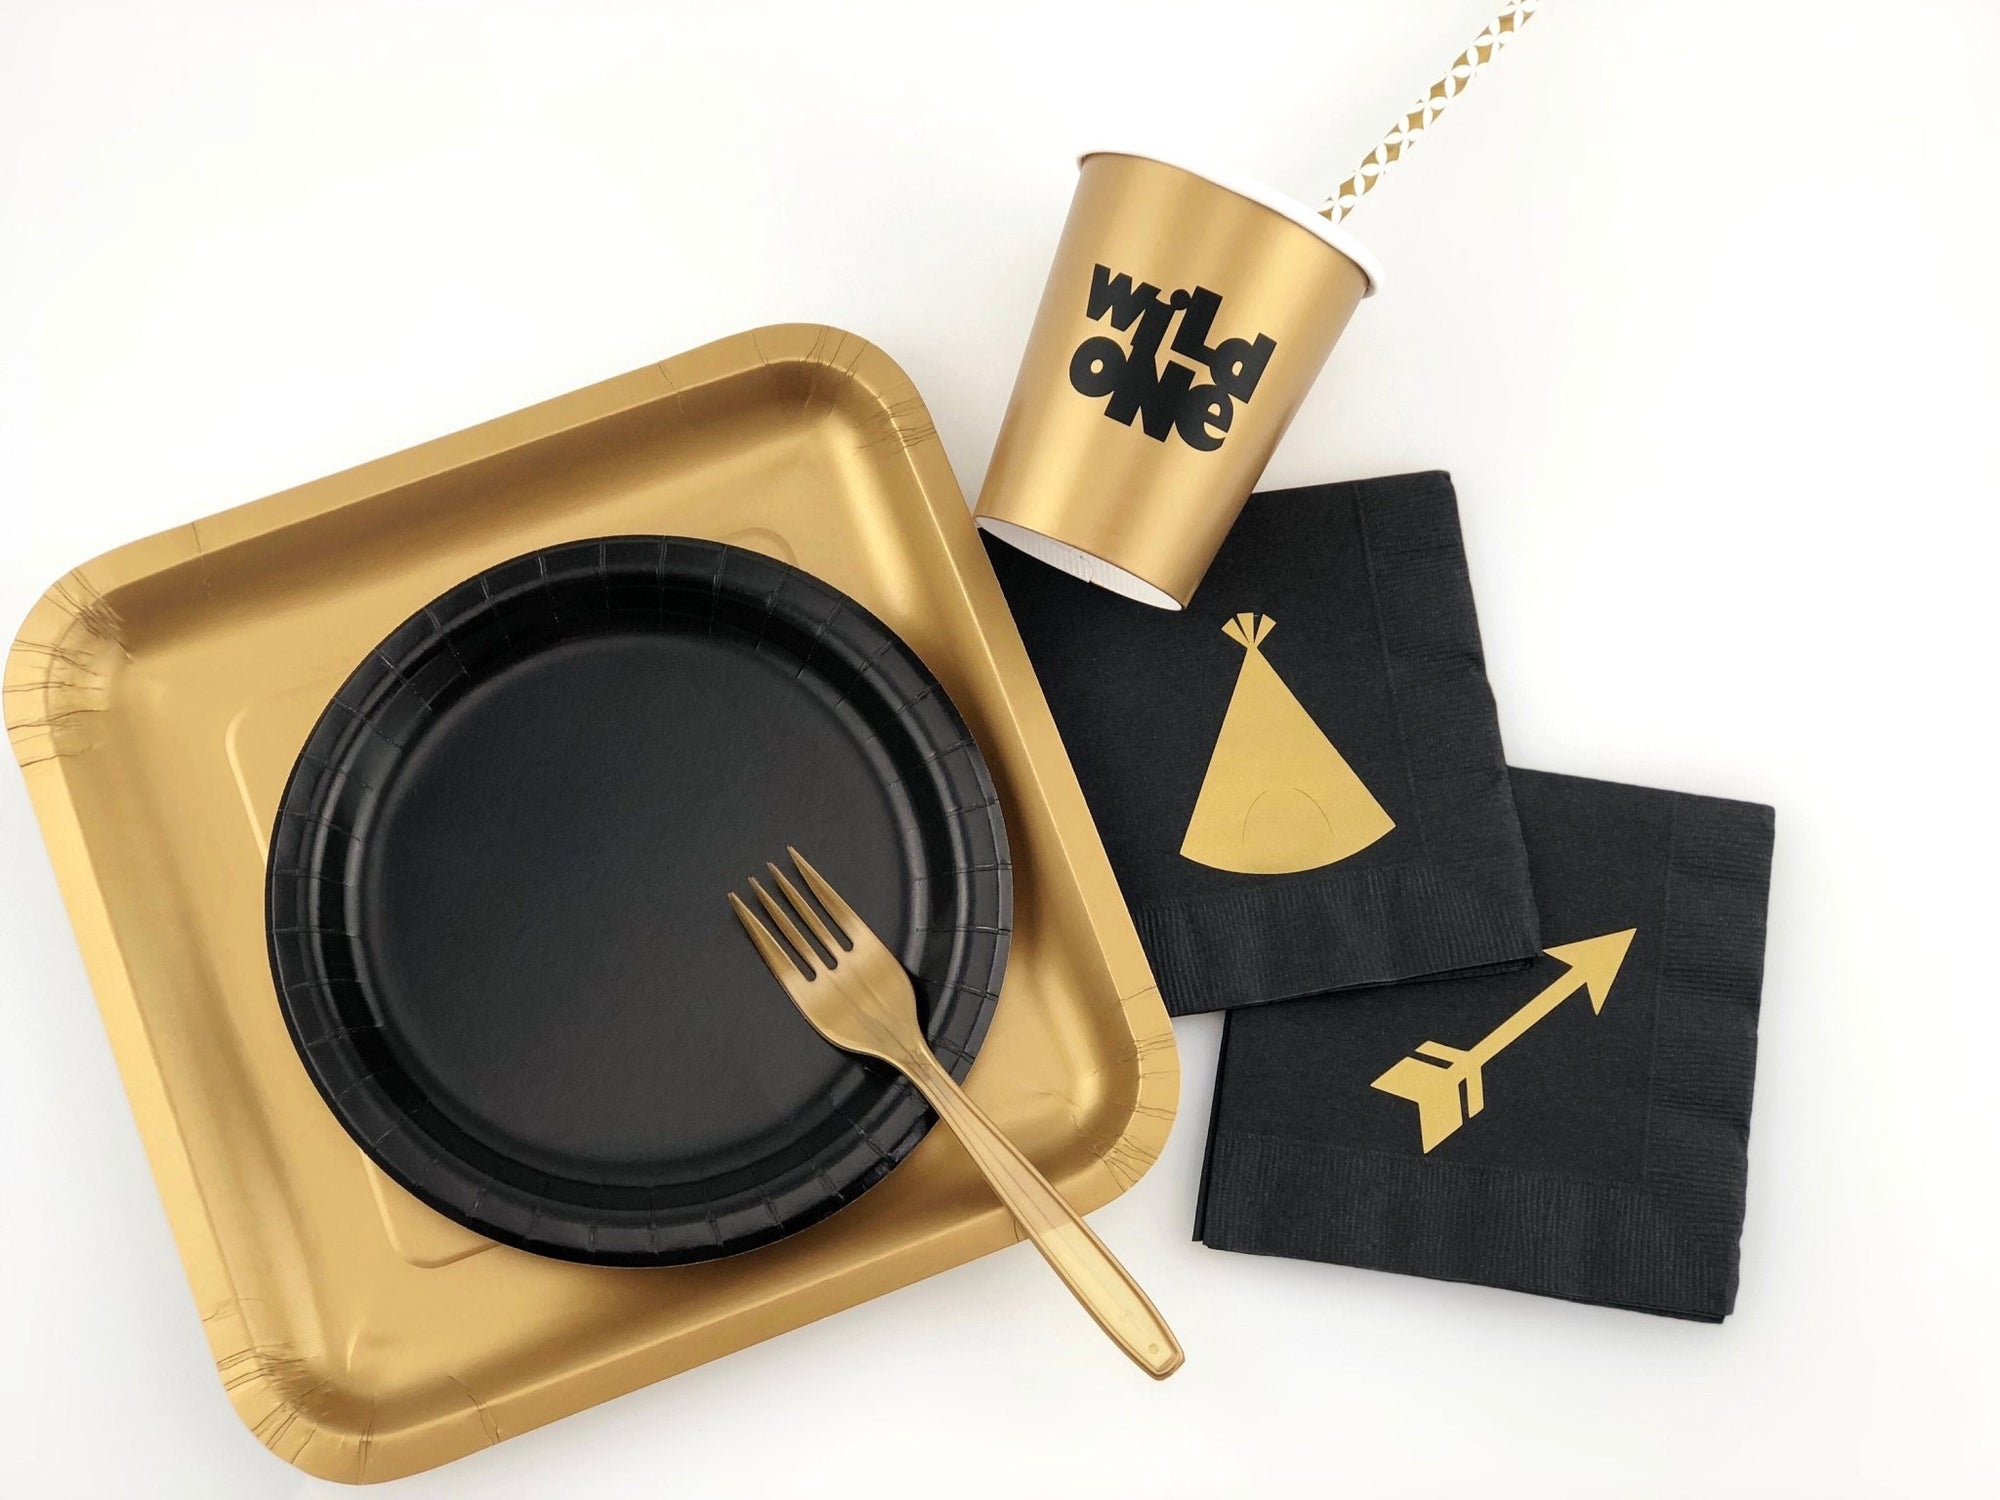 Black and Gold "Wild One" Party Set - Stesha Party